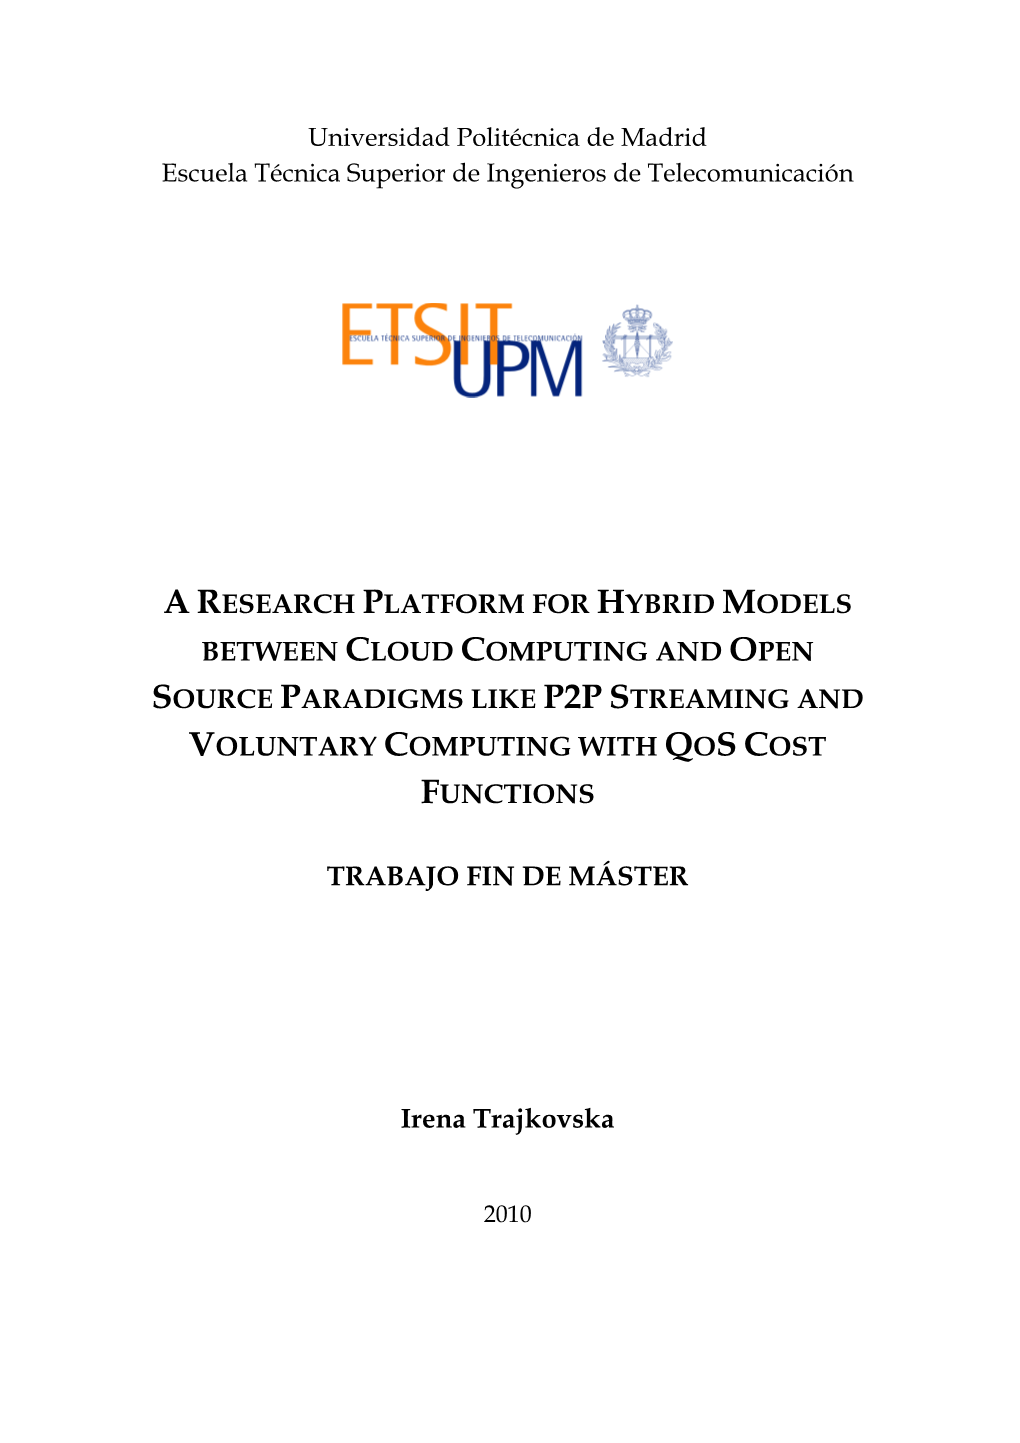 A Research Platform for Hybrid Models Between Cloud Computing and Open Source Paradigms Like P2p Streaming and Voluntary Computing with Qos Cost Functions